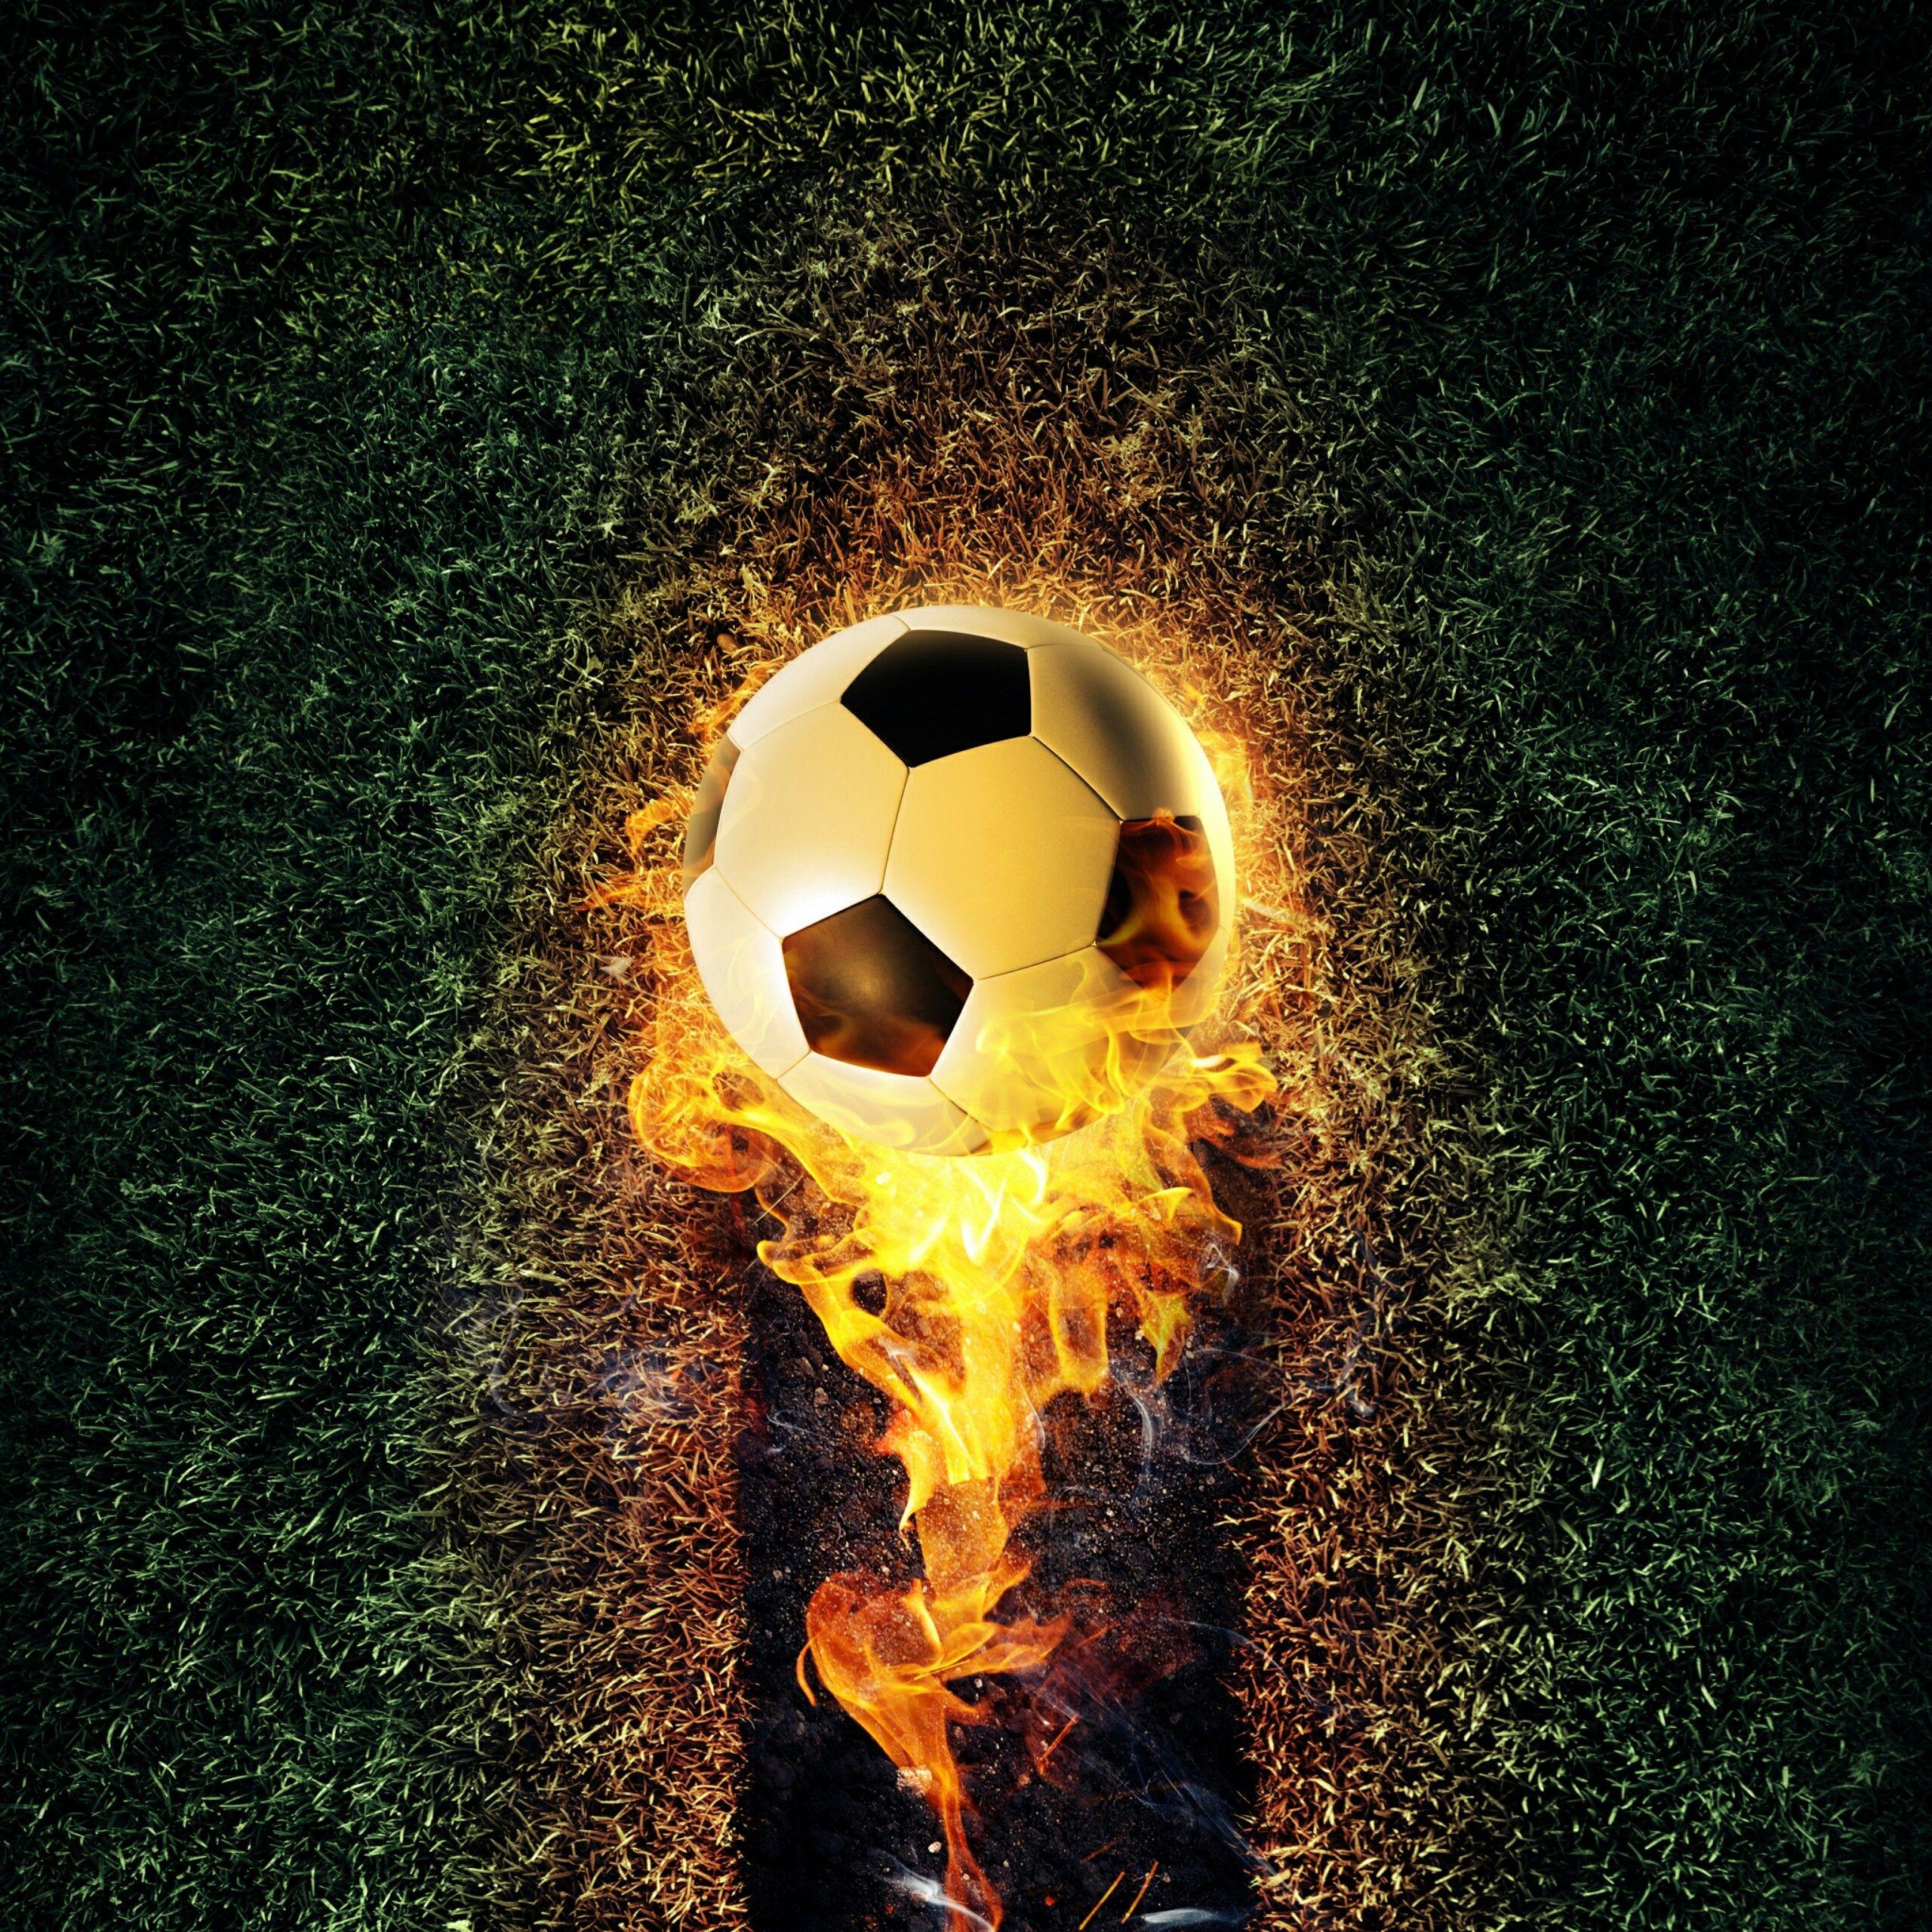 Soccer Ball Wallpapers 67 pictures